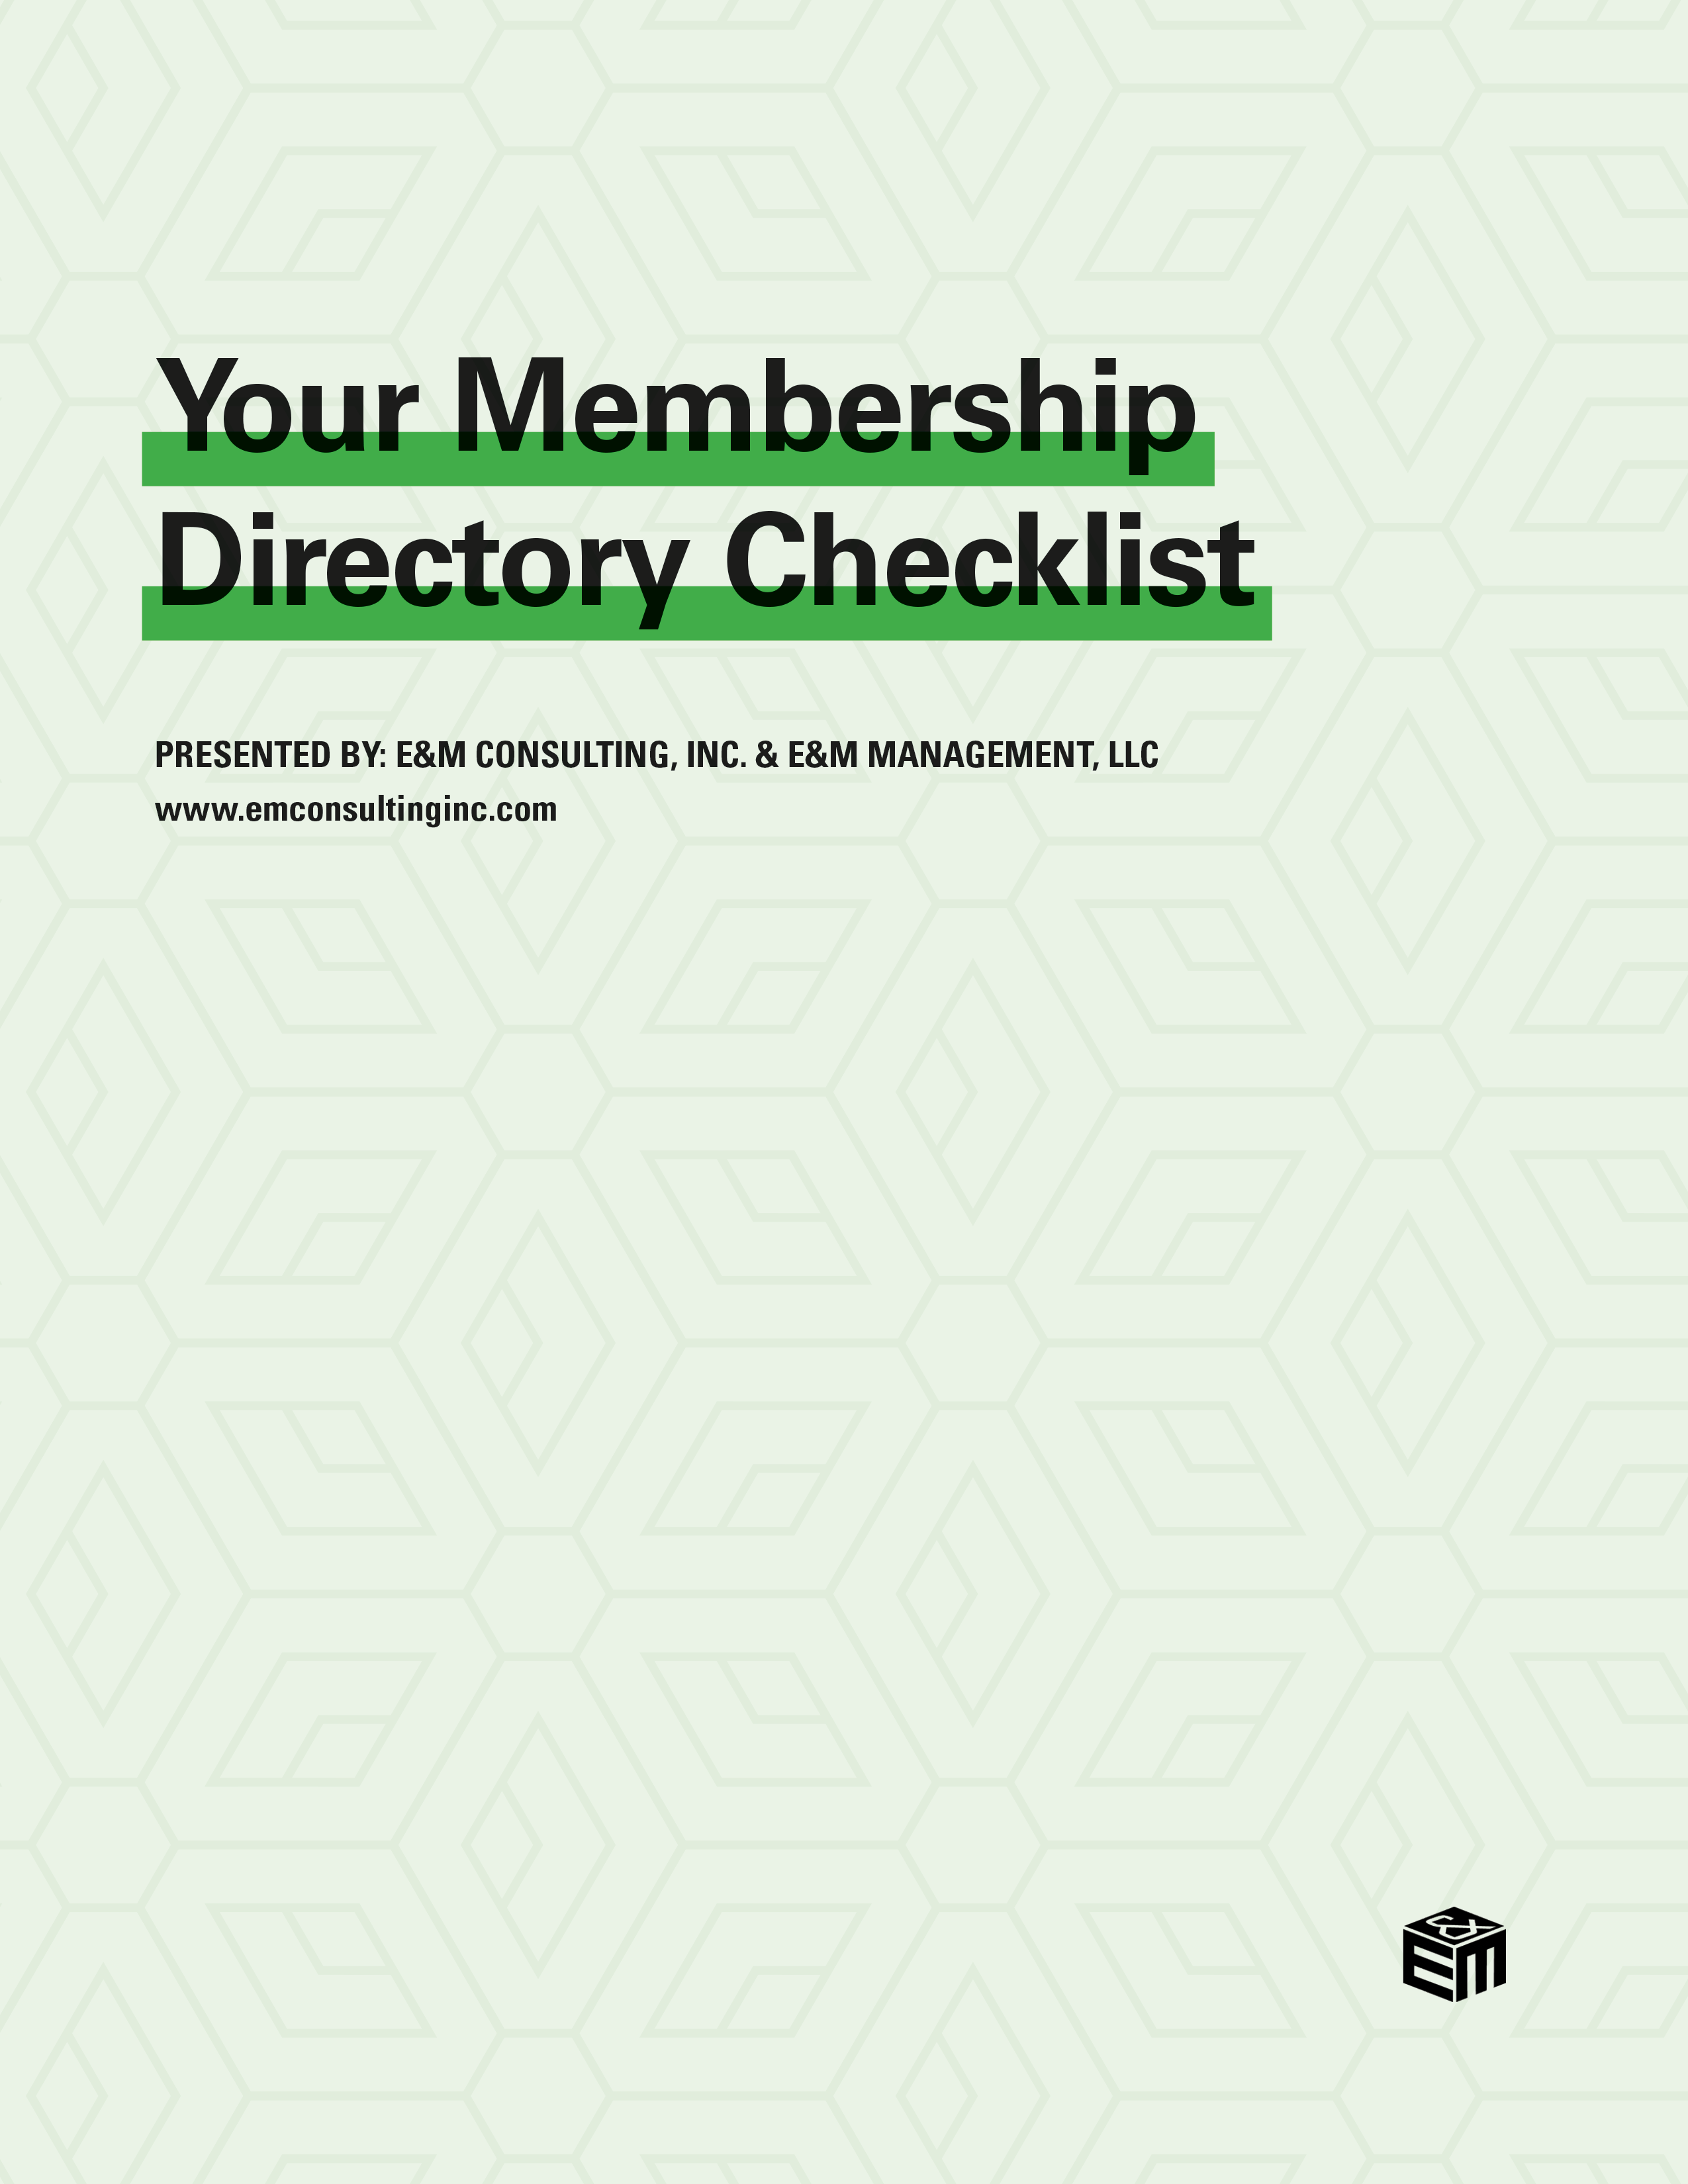 Green snowflake pattern for Your Membership Directory Checklist